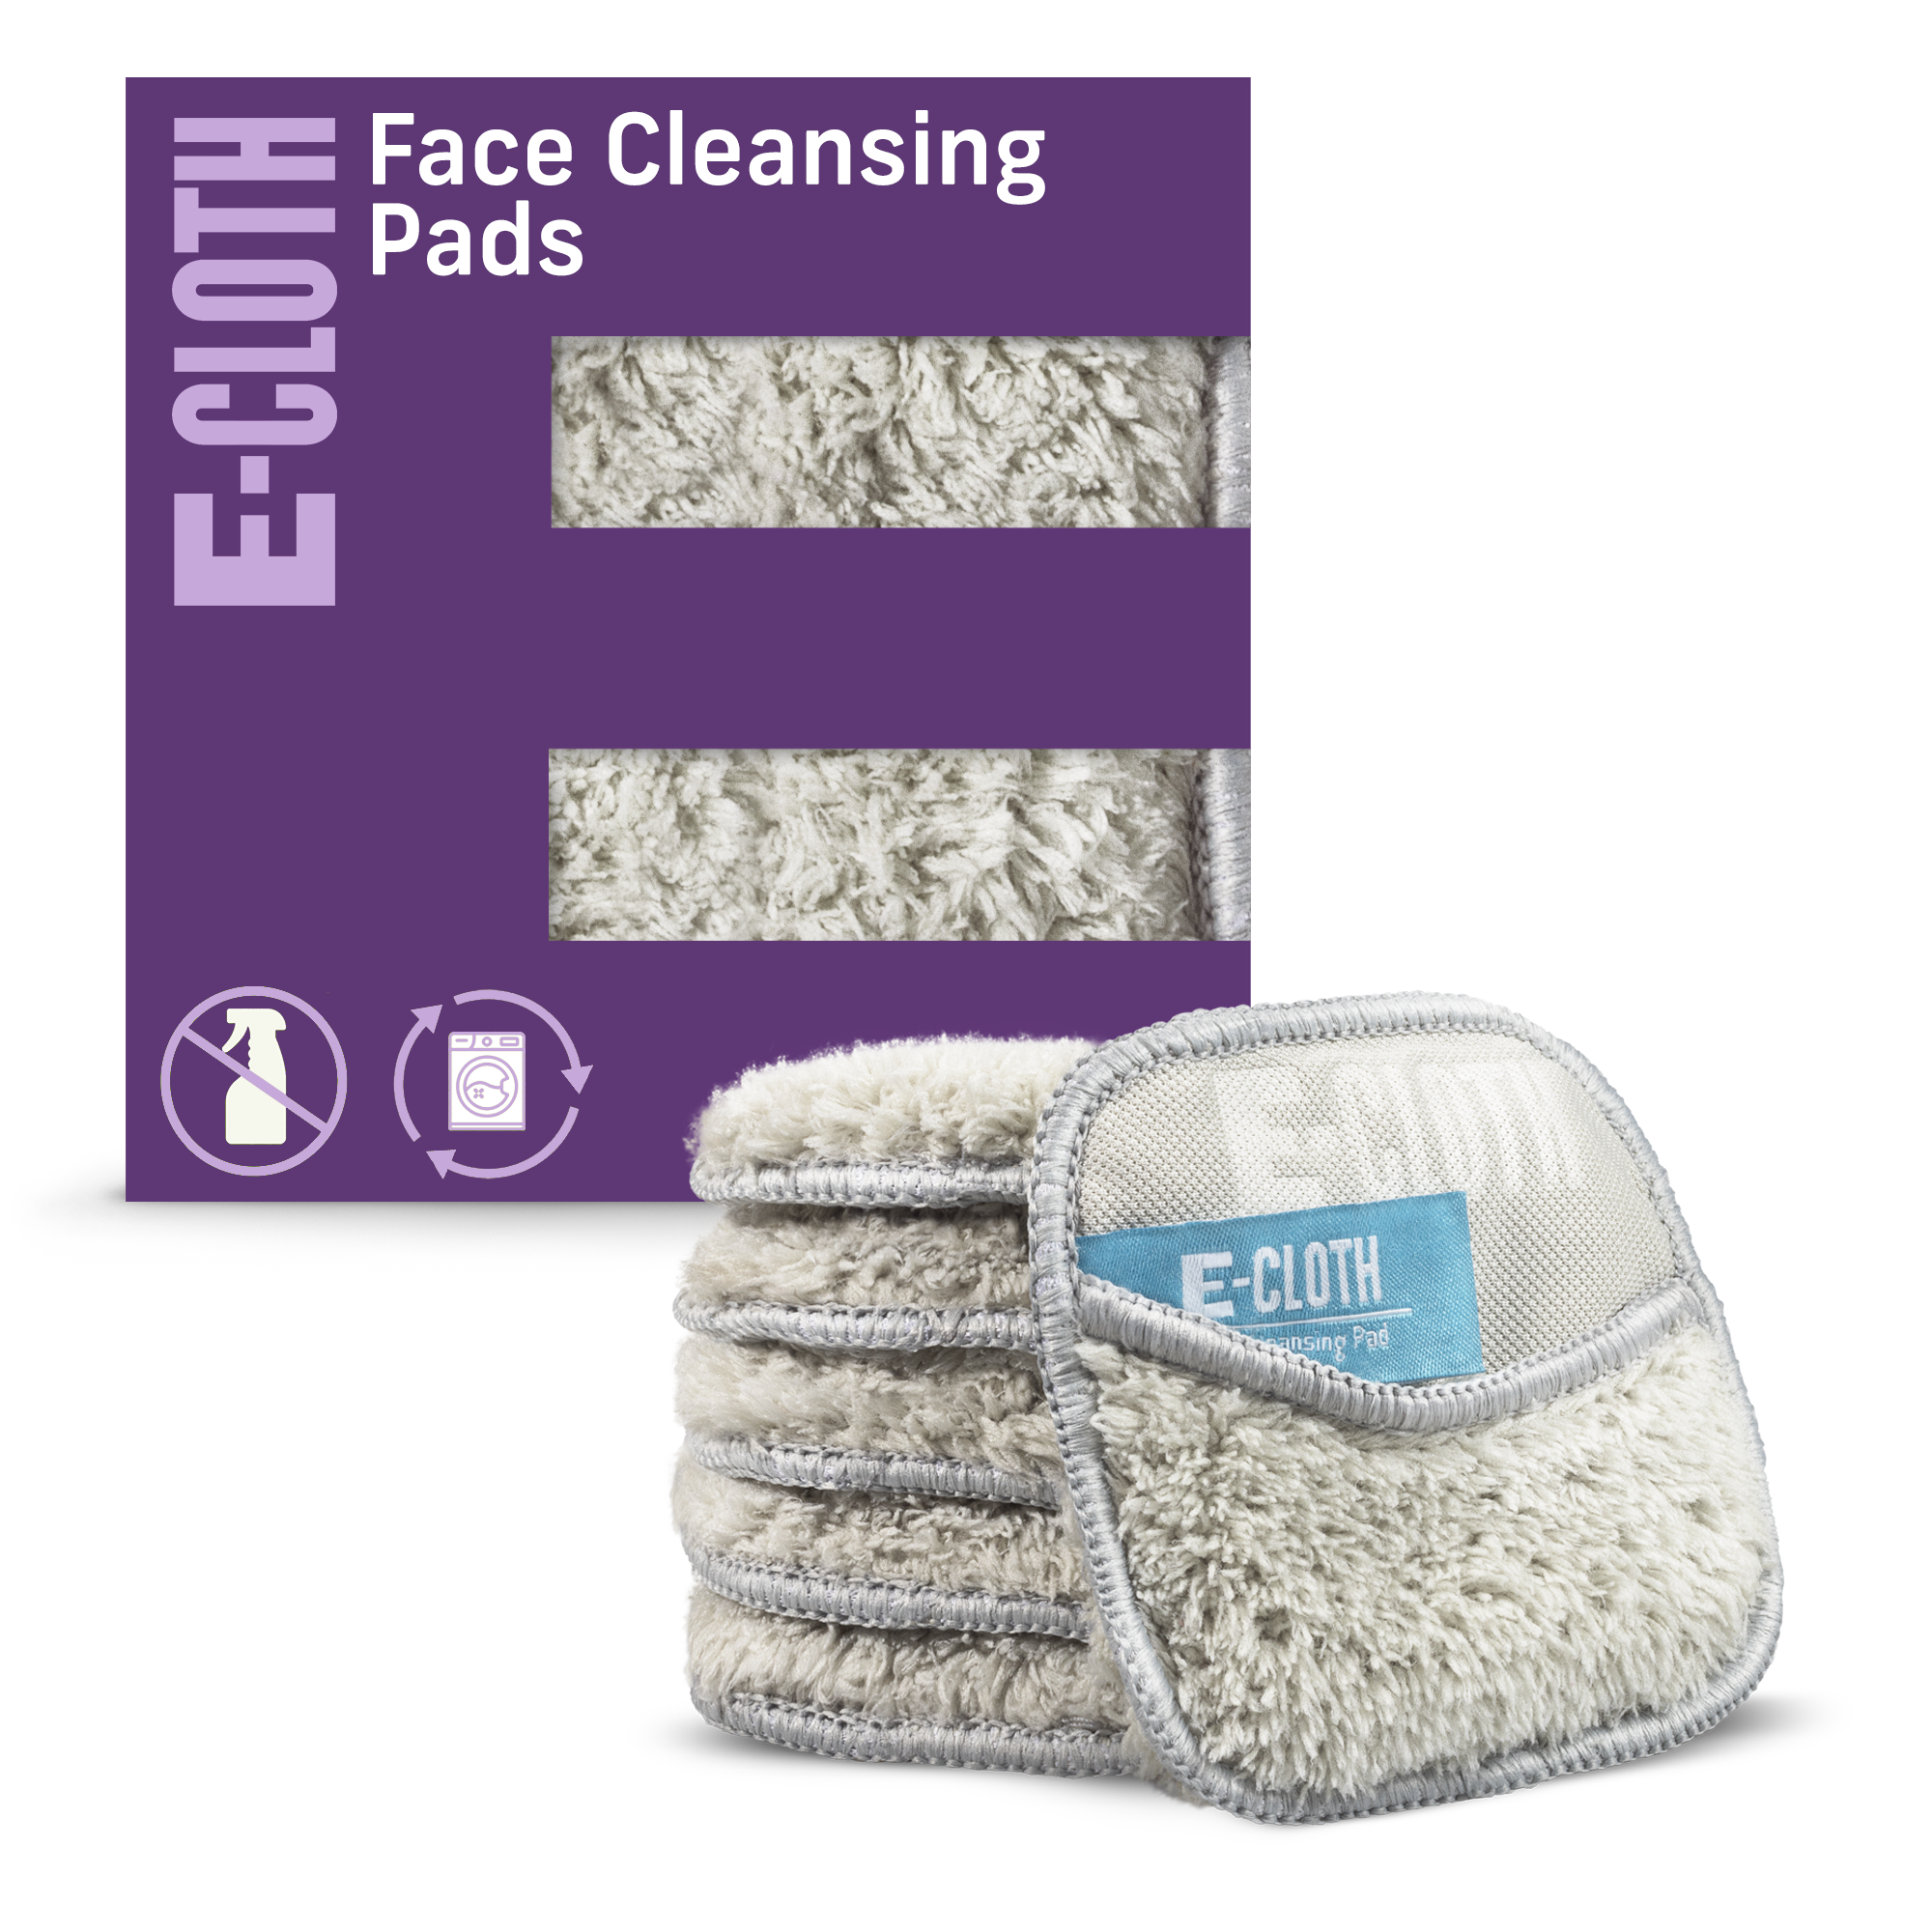 Face Cleansing Pads